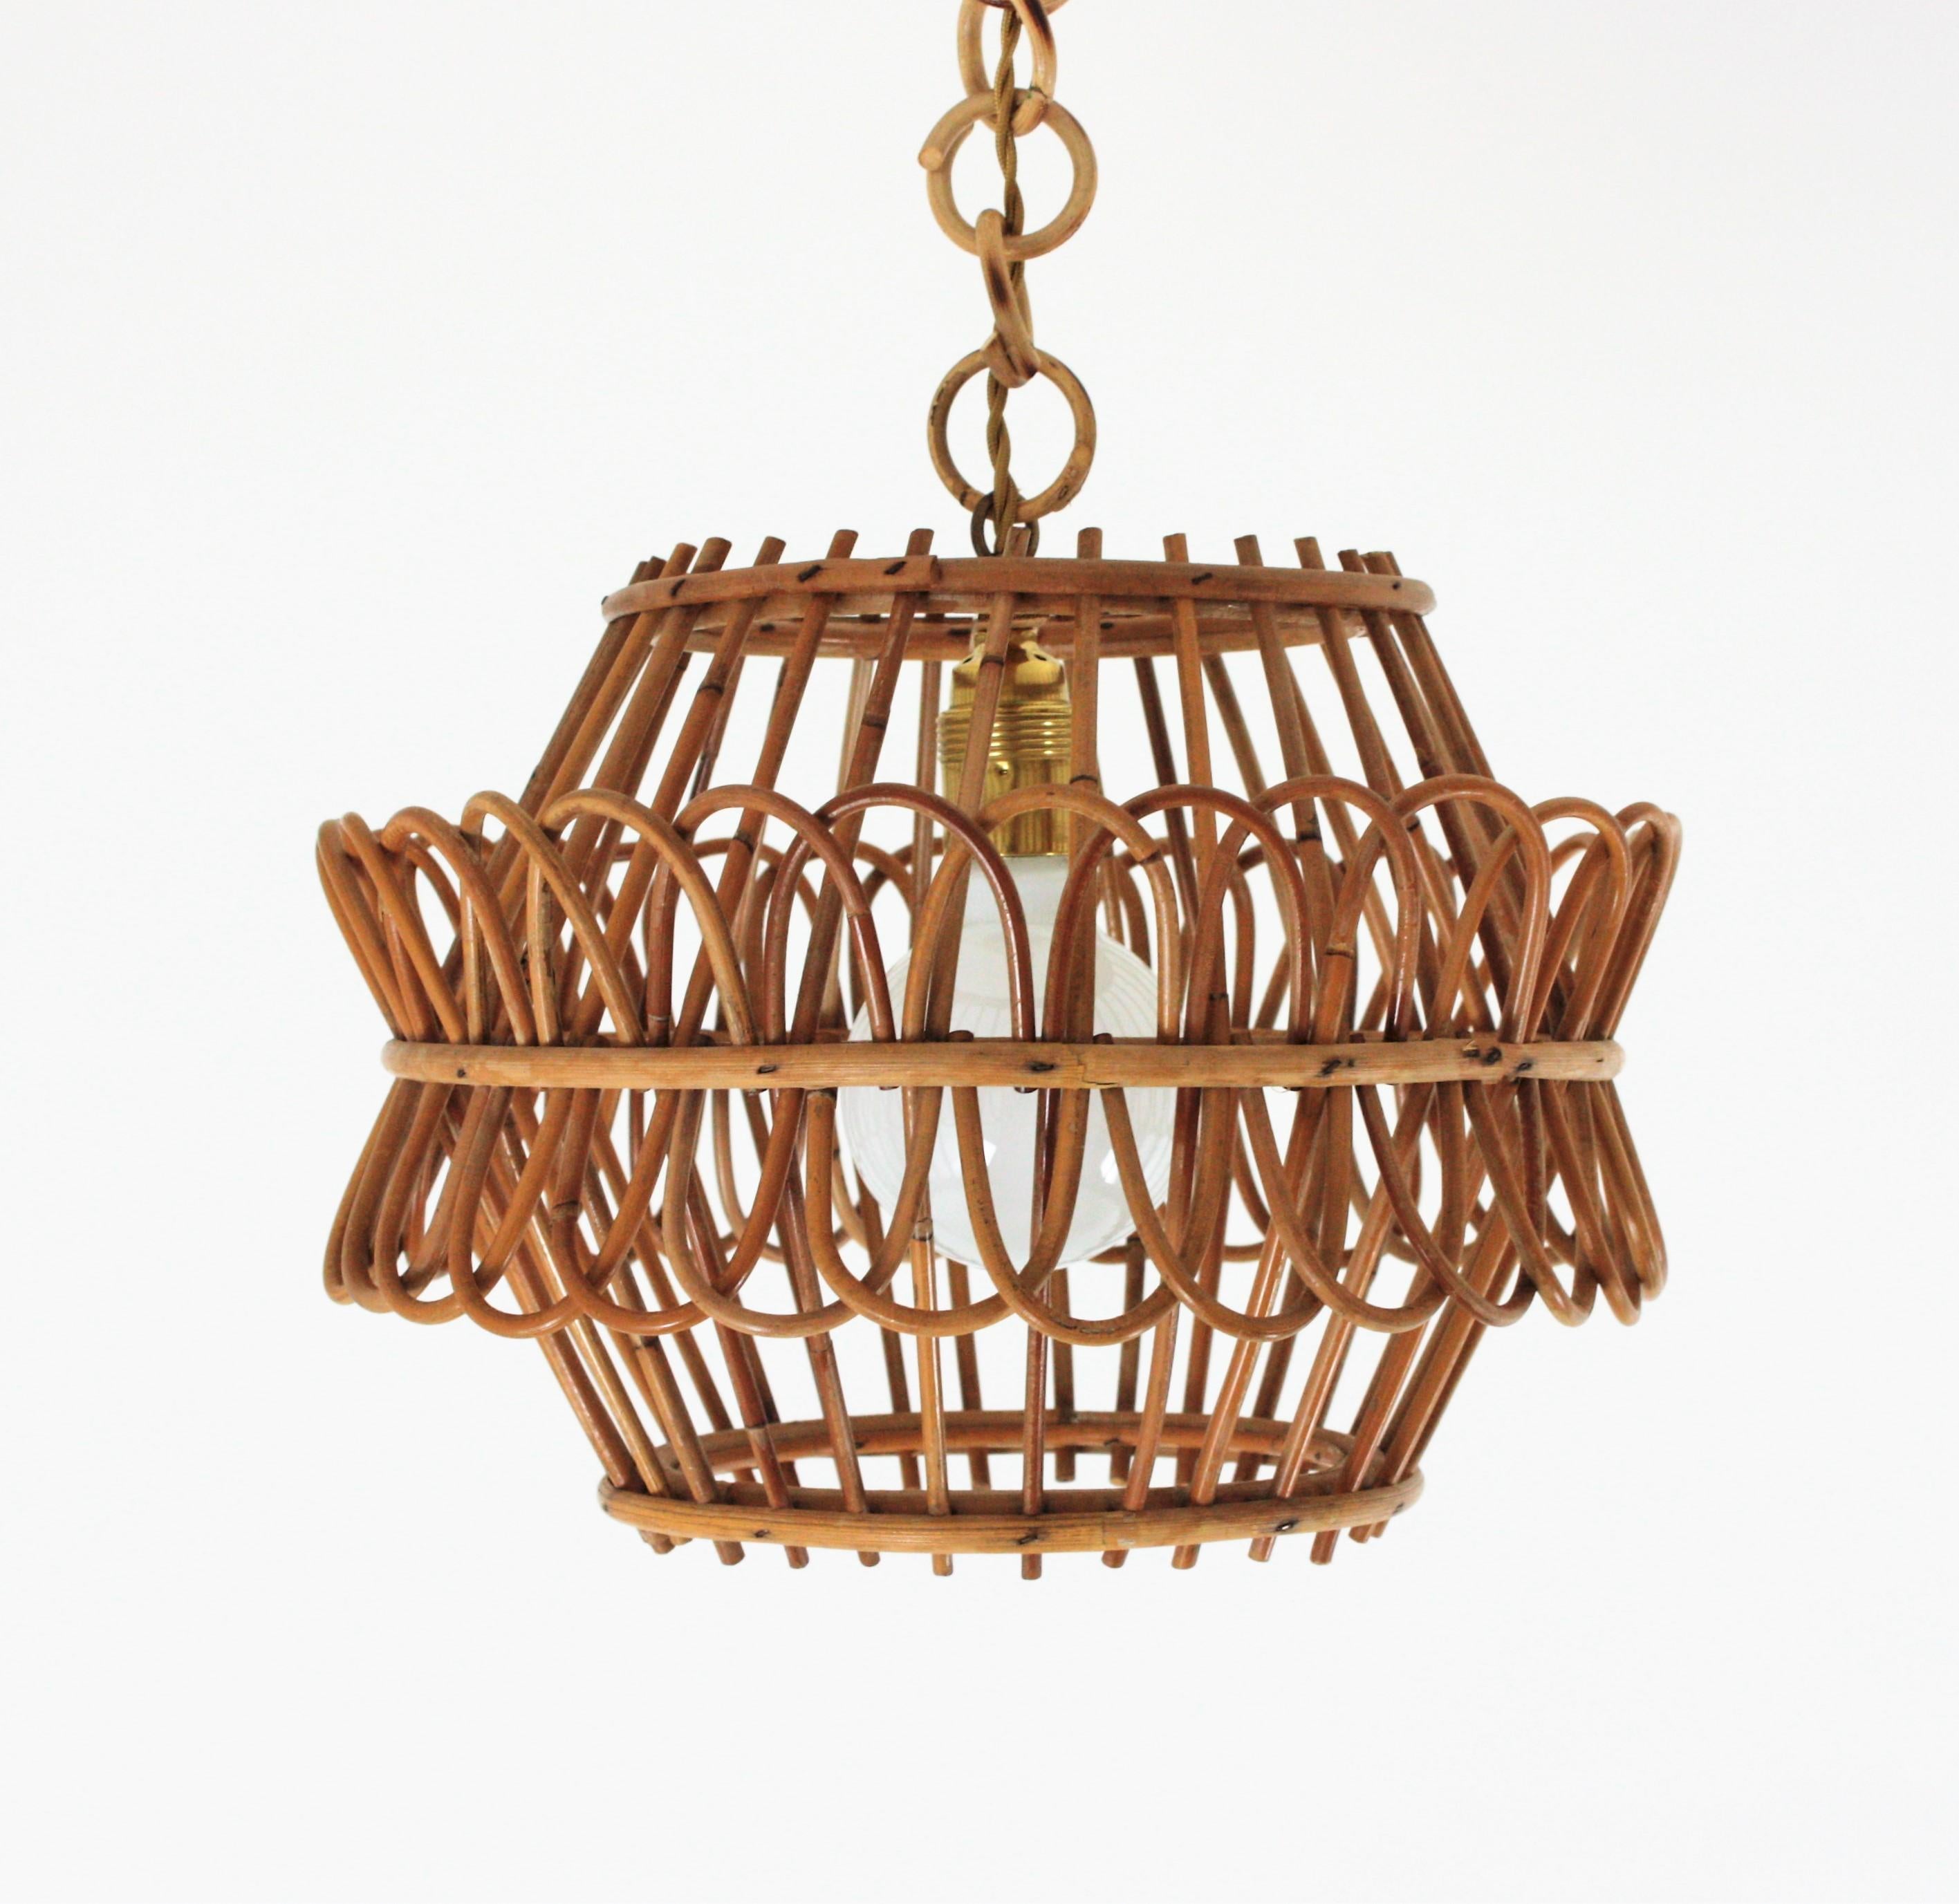 20th Century French Pendant Light or Lantern in Rattan, 1950s For Sale